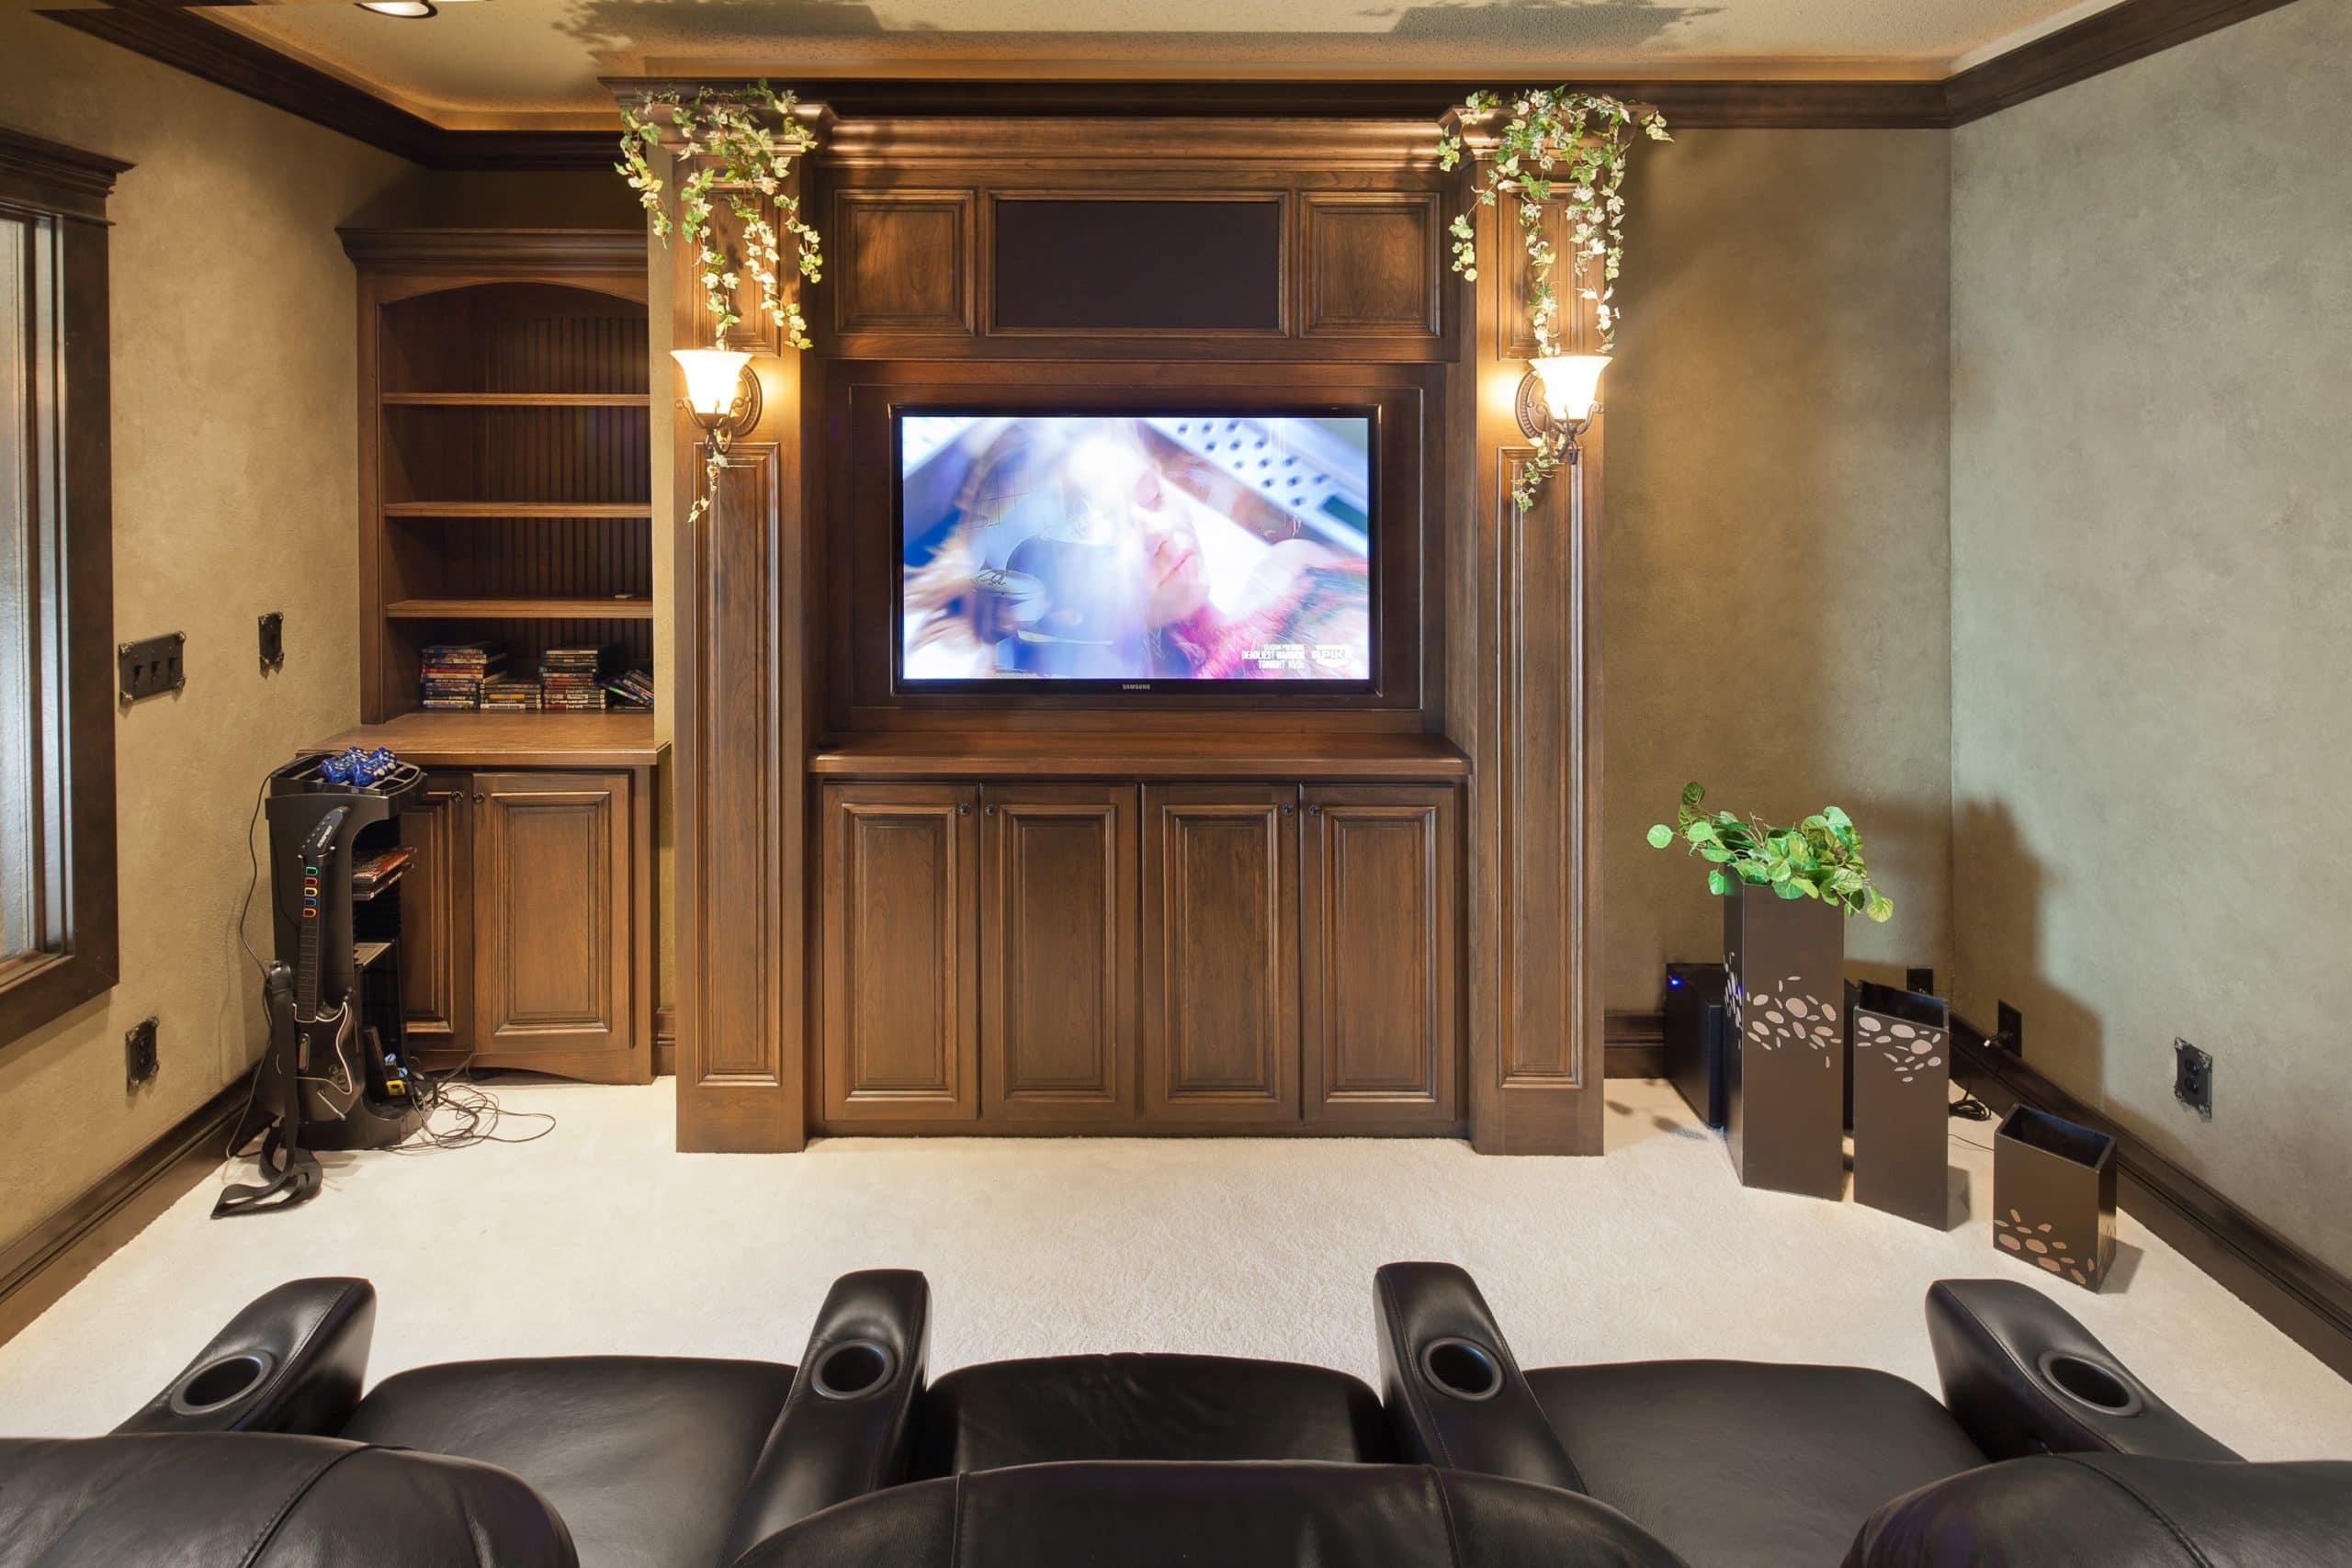 Pequot Lakes #48 Home Theater